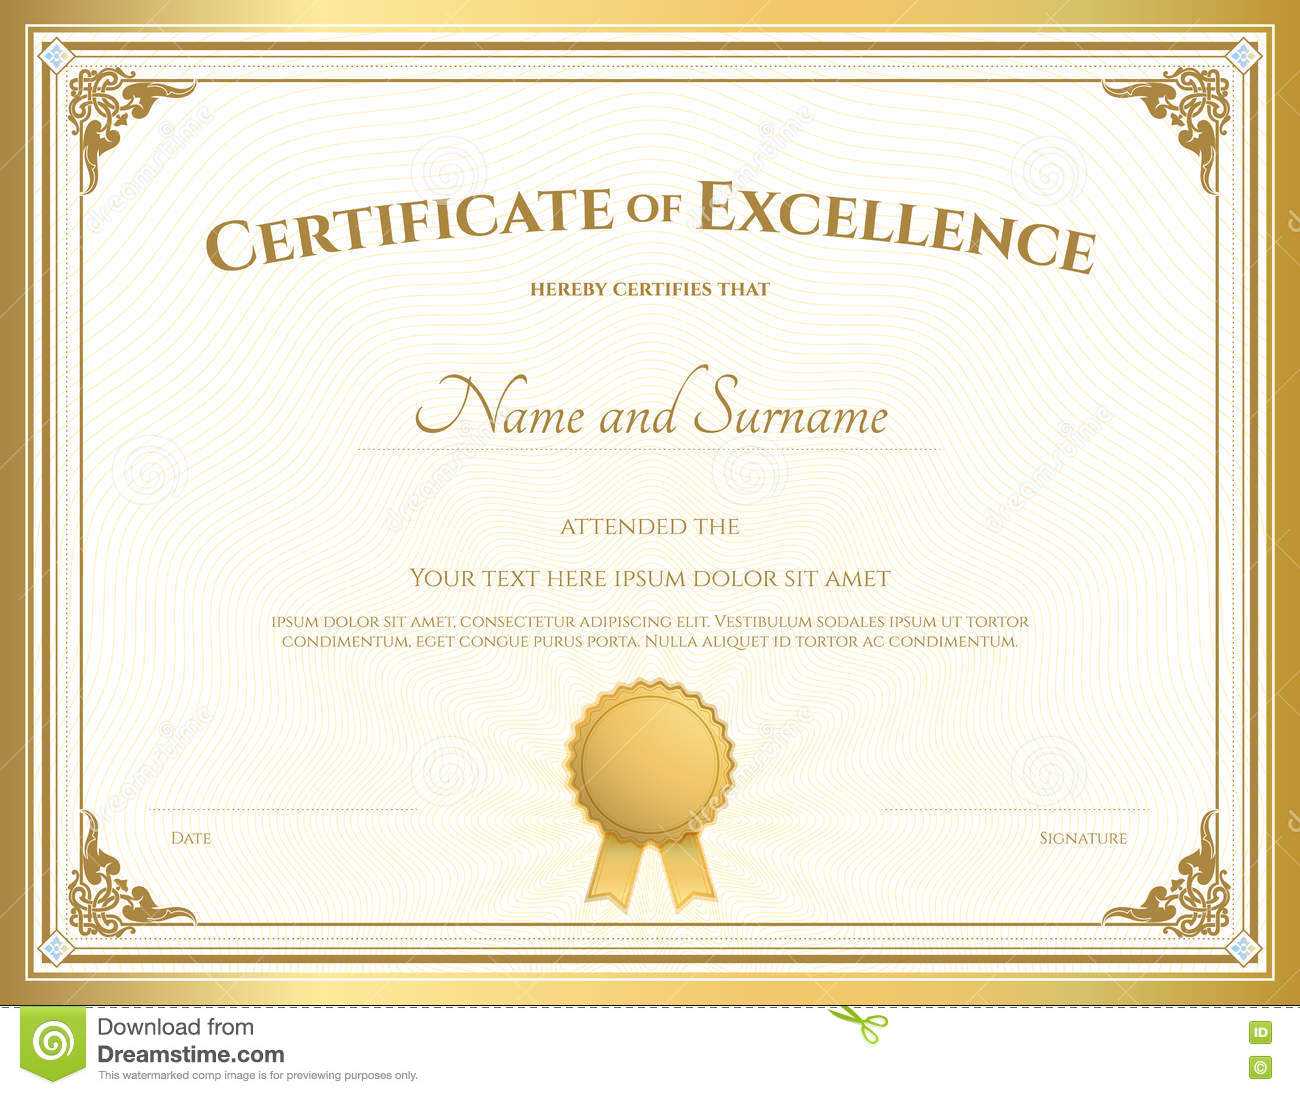 Certificate Of Excellence Template With Gold Border Stock For Free Certificate Of Excellence Template